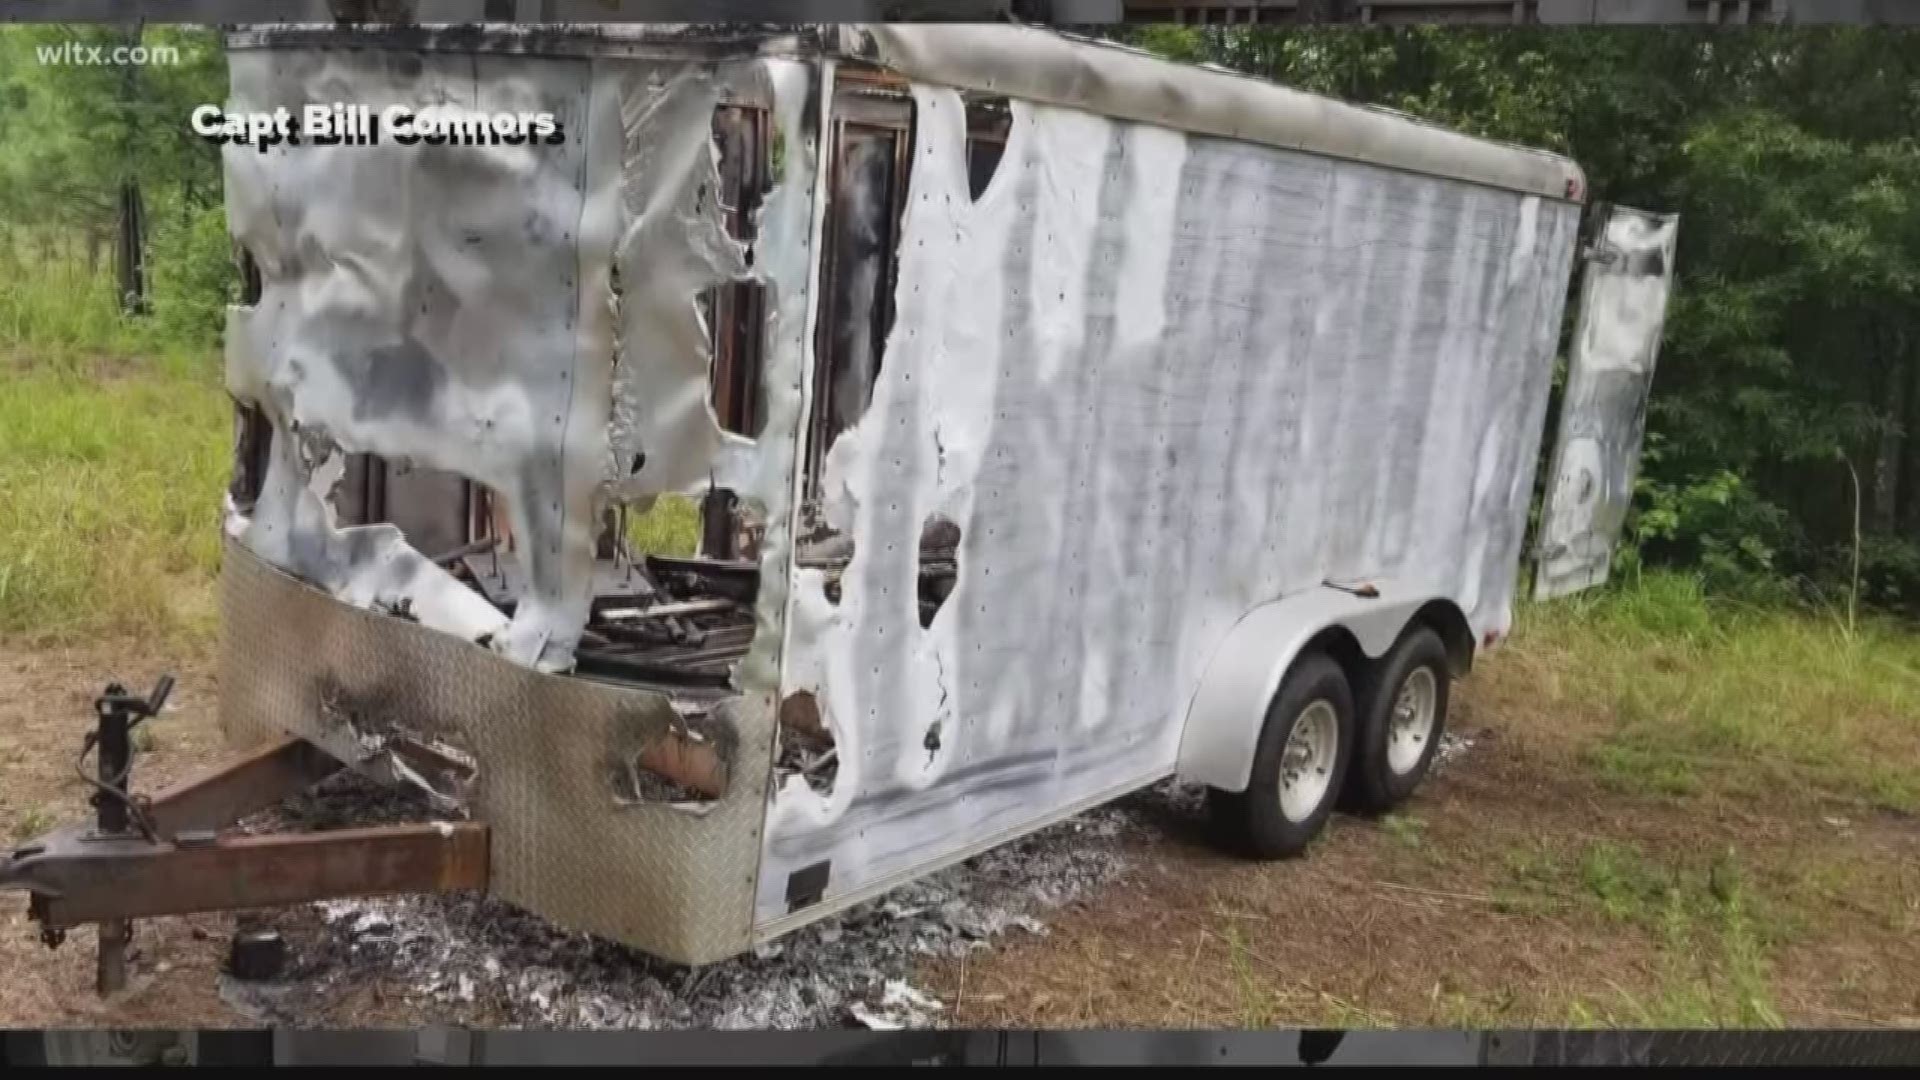 The trailer had been set on fire with all their items inside